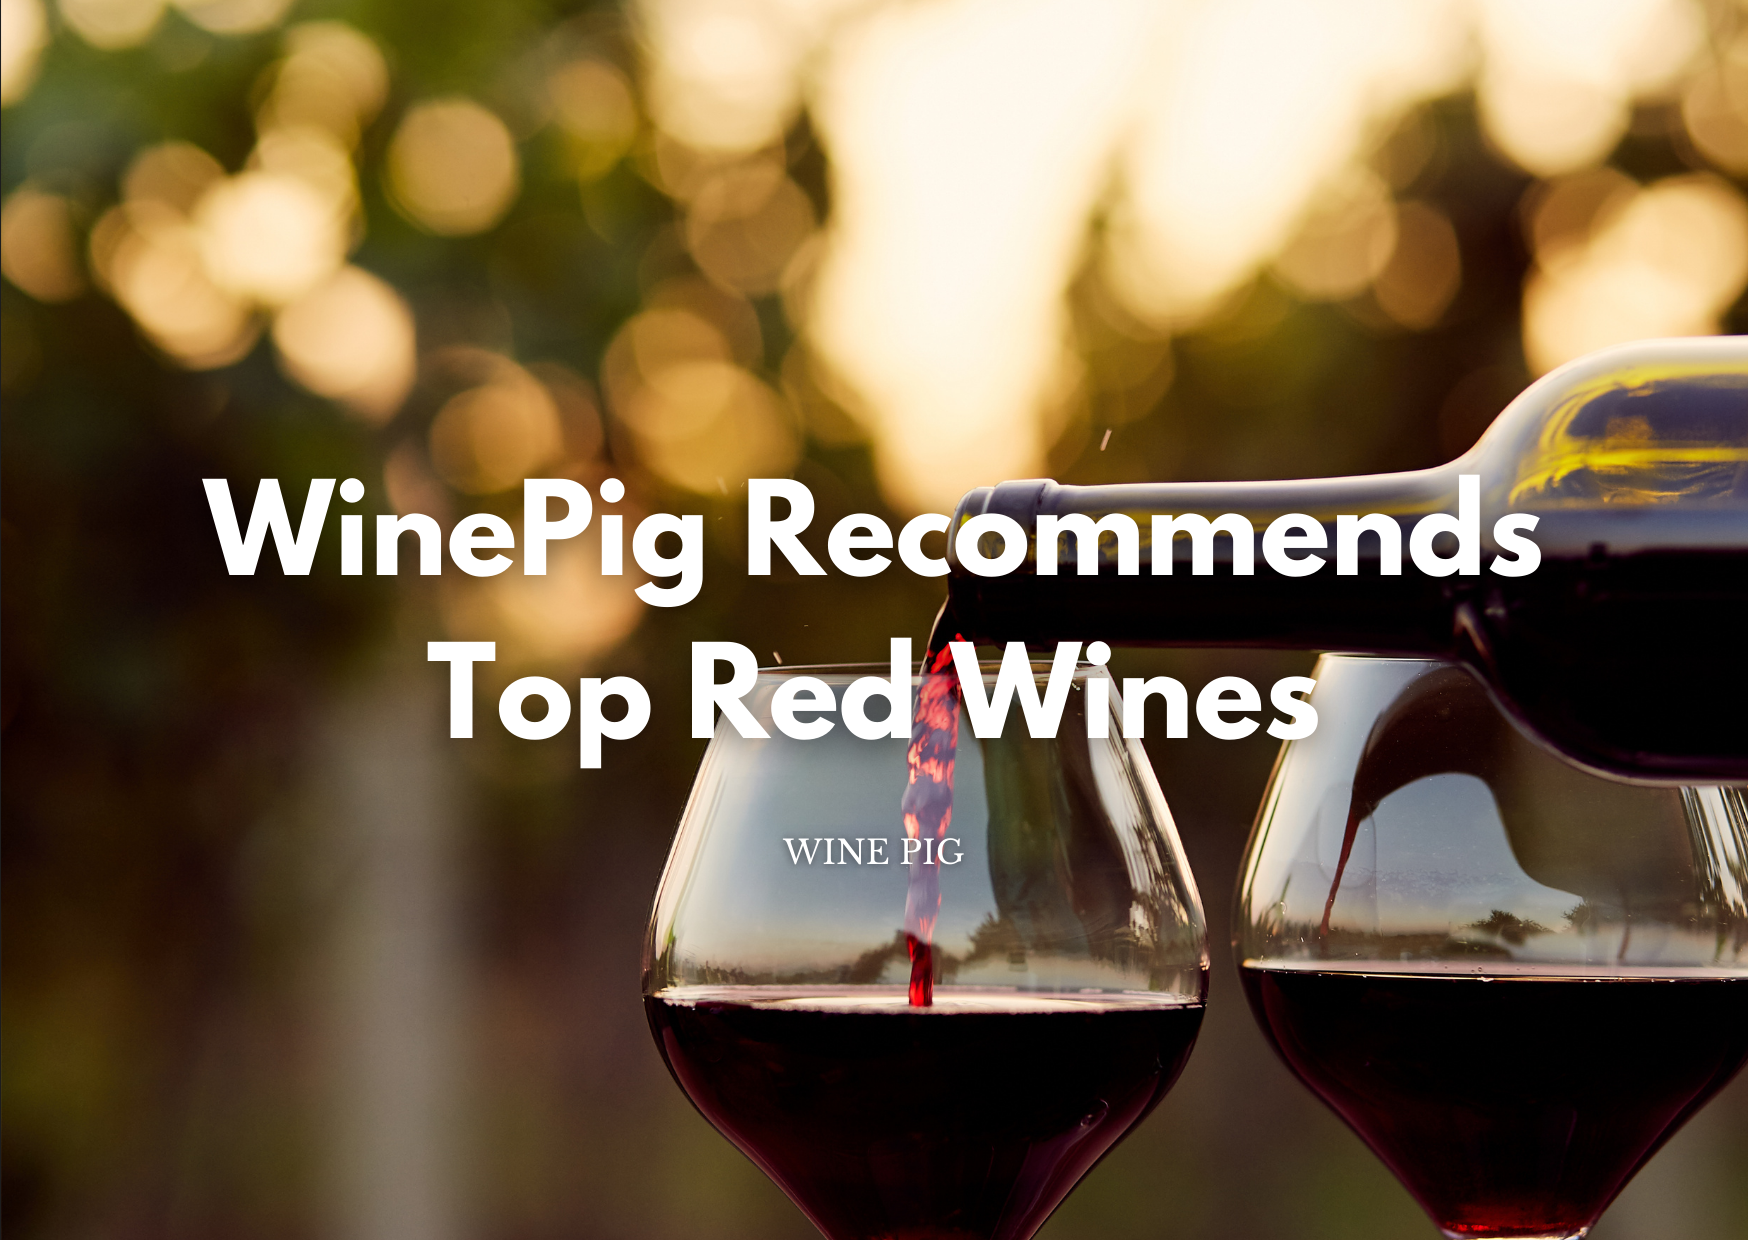 wine pig recommends